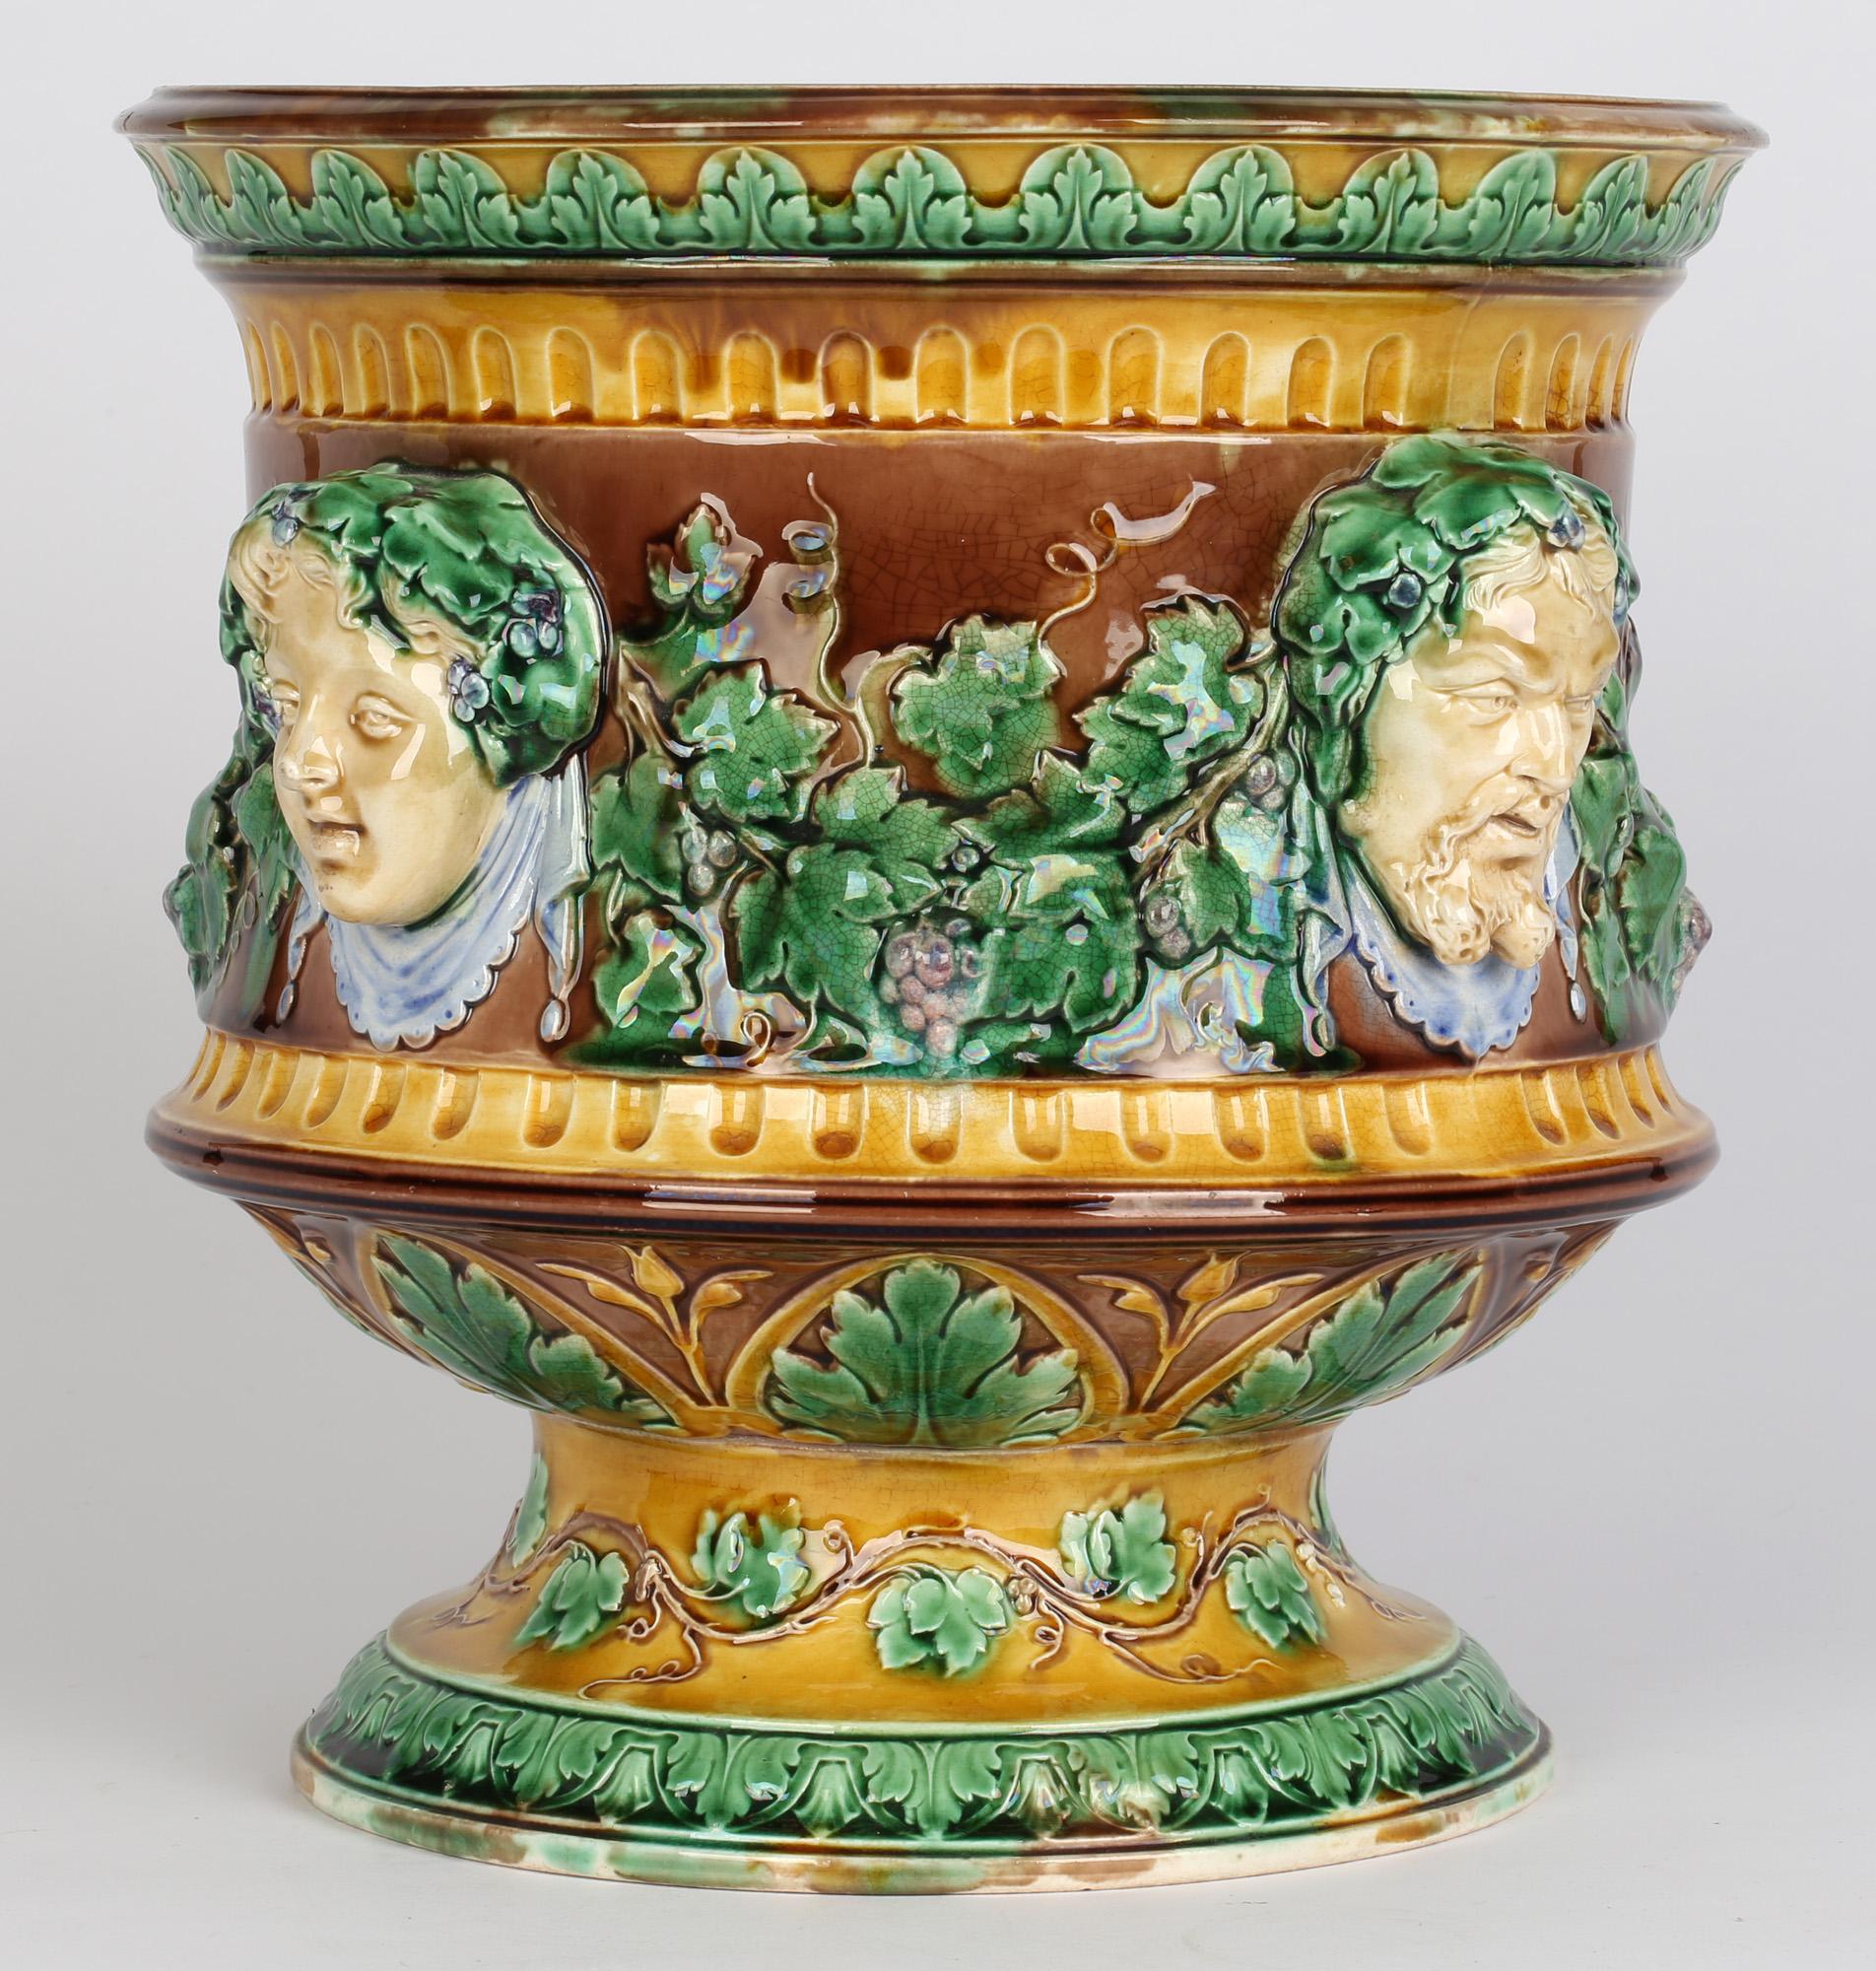 Wedgwood Large and Impressive Majolica Jardiniere with Masks and Trailing Vines For Sale 6